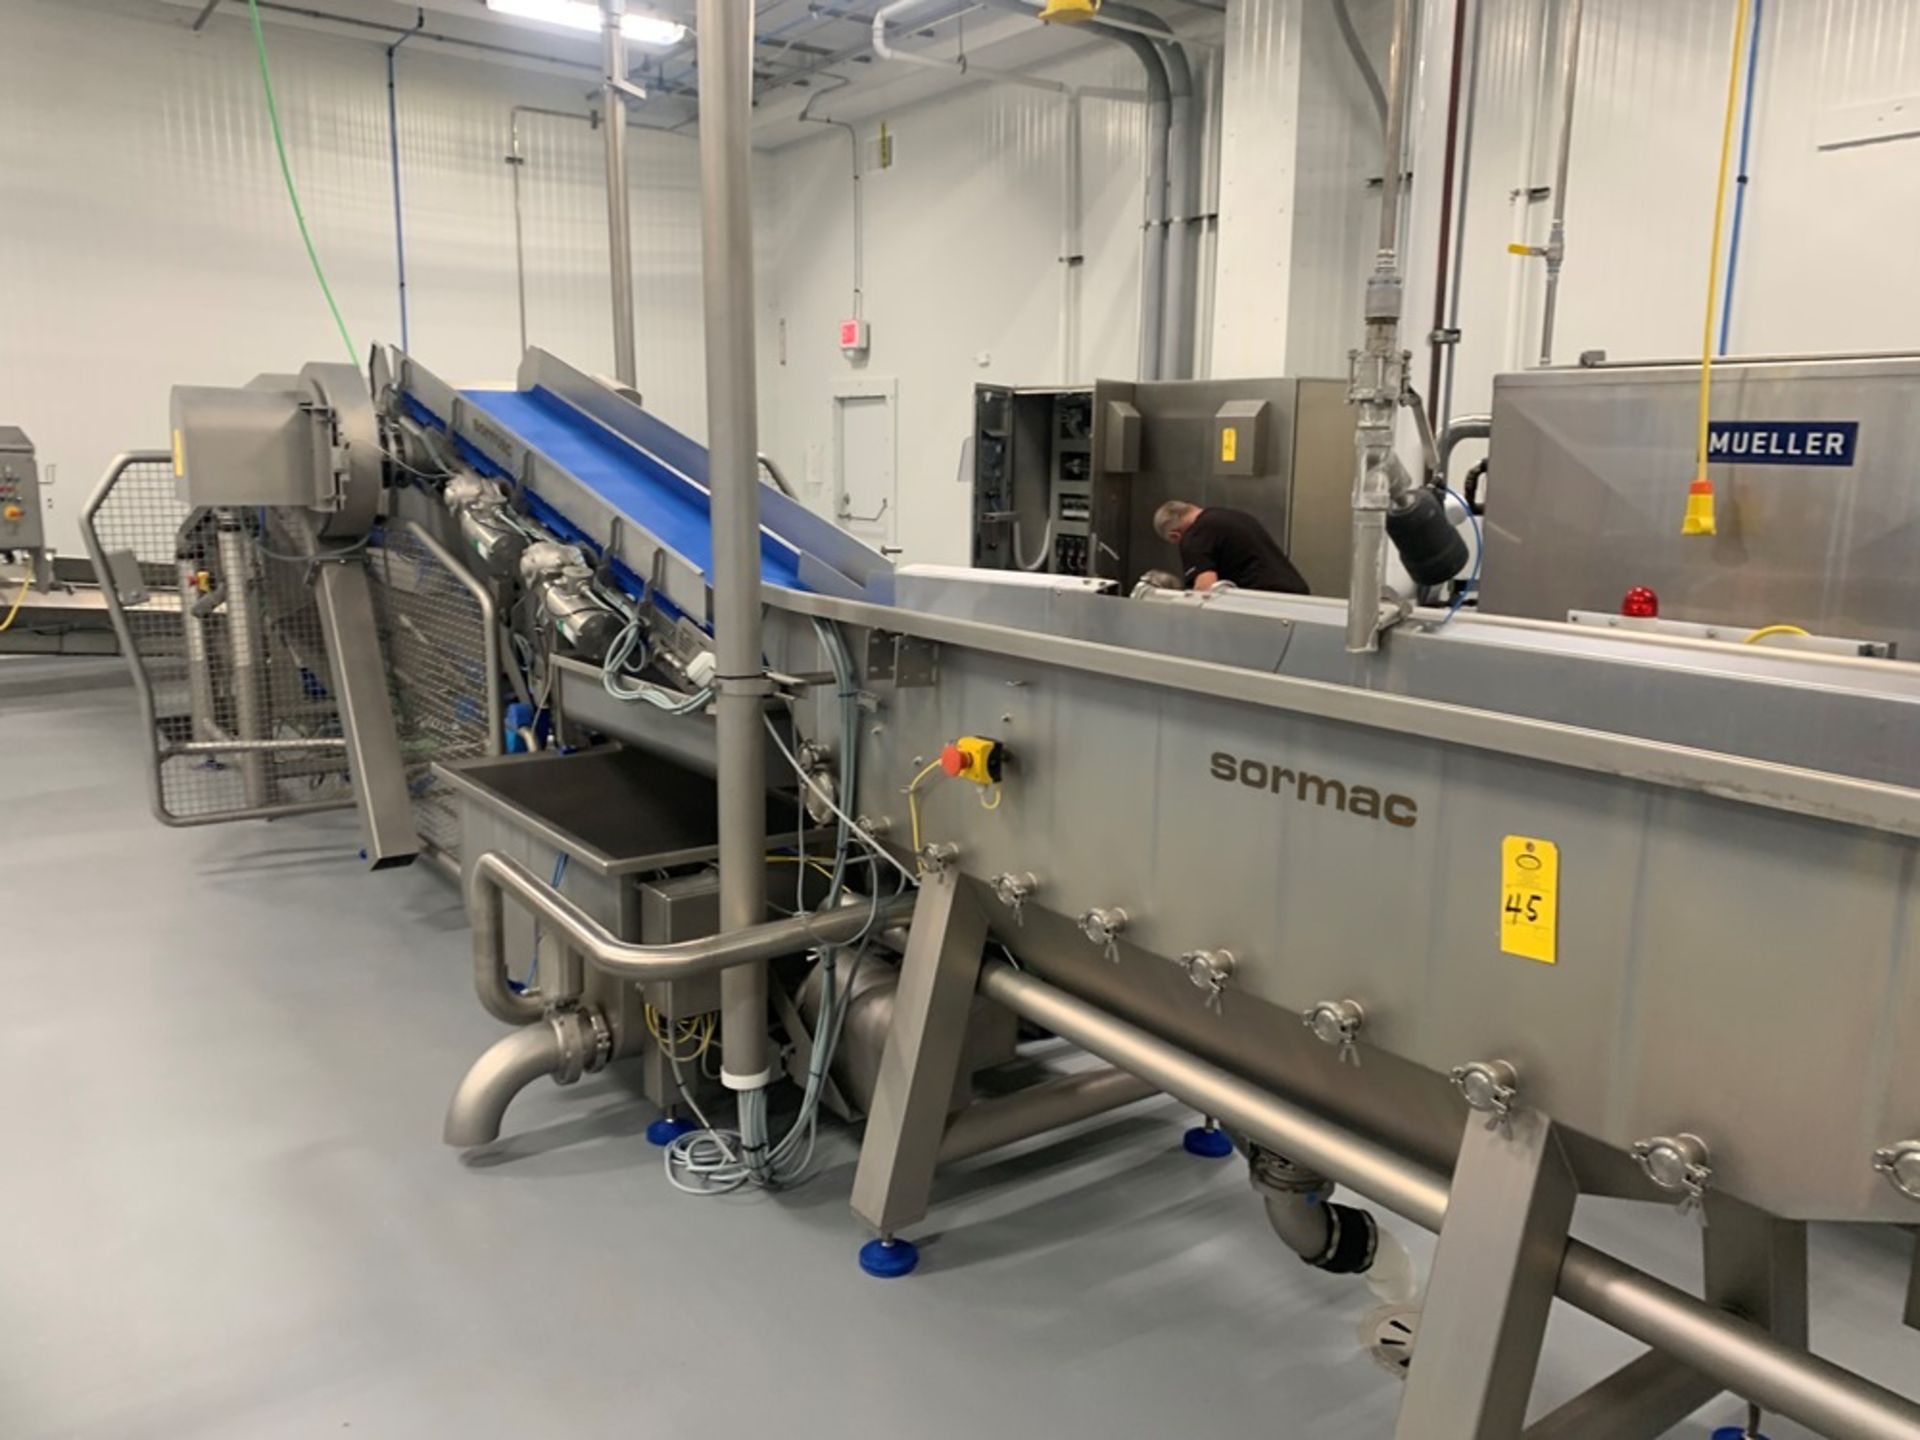 Sormac Cleaning and Drying System, Sormac Mdl. 180950/10S-PS 70/50/010 Washing System , Mfg. 2018, - Image 9 of 41